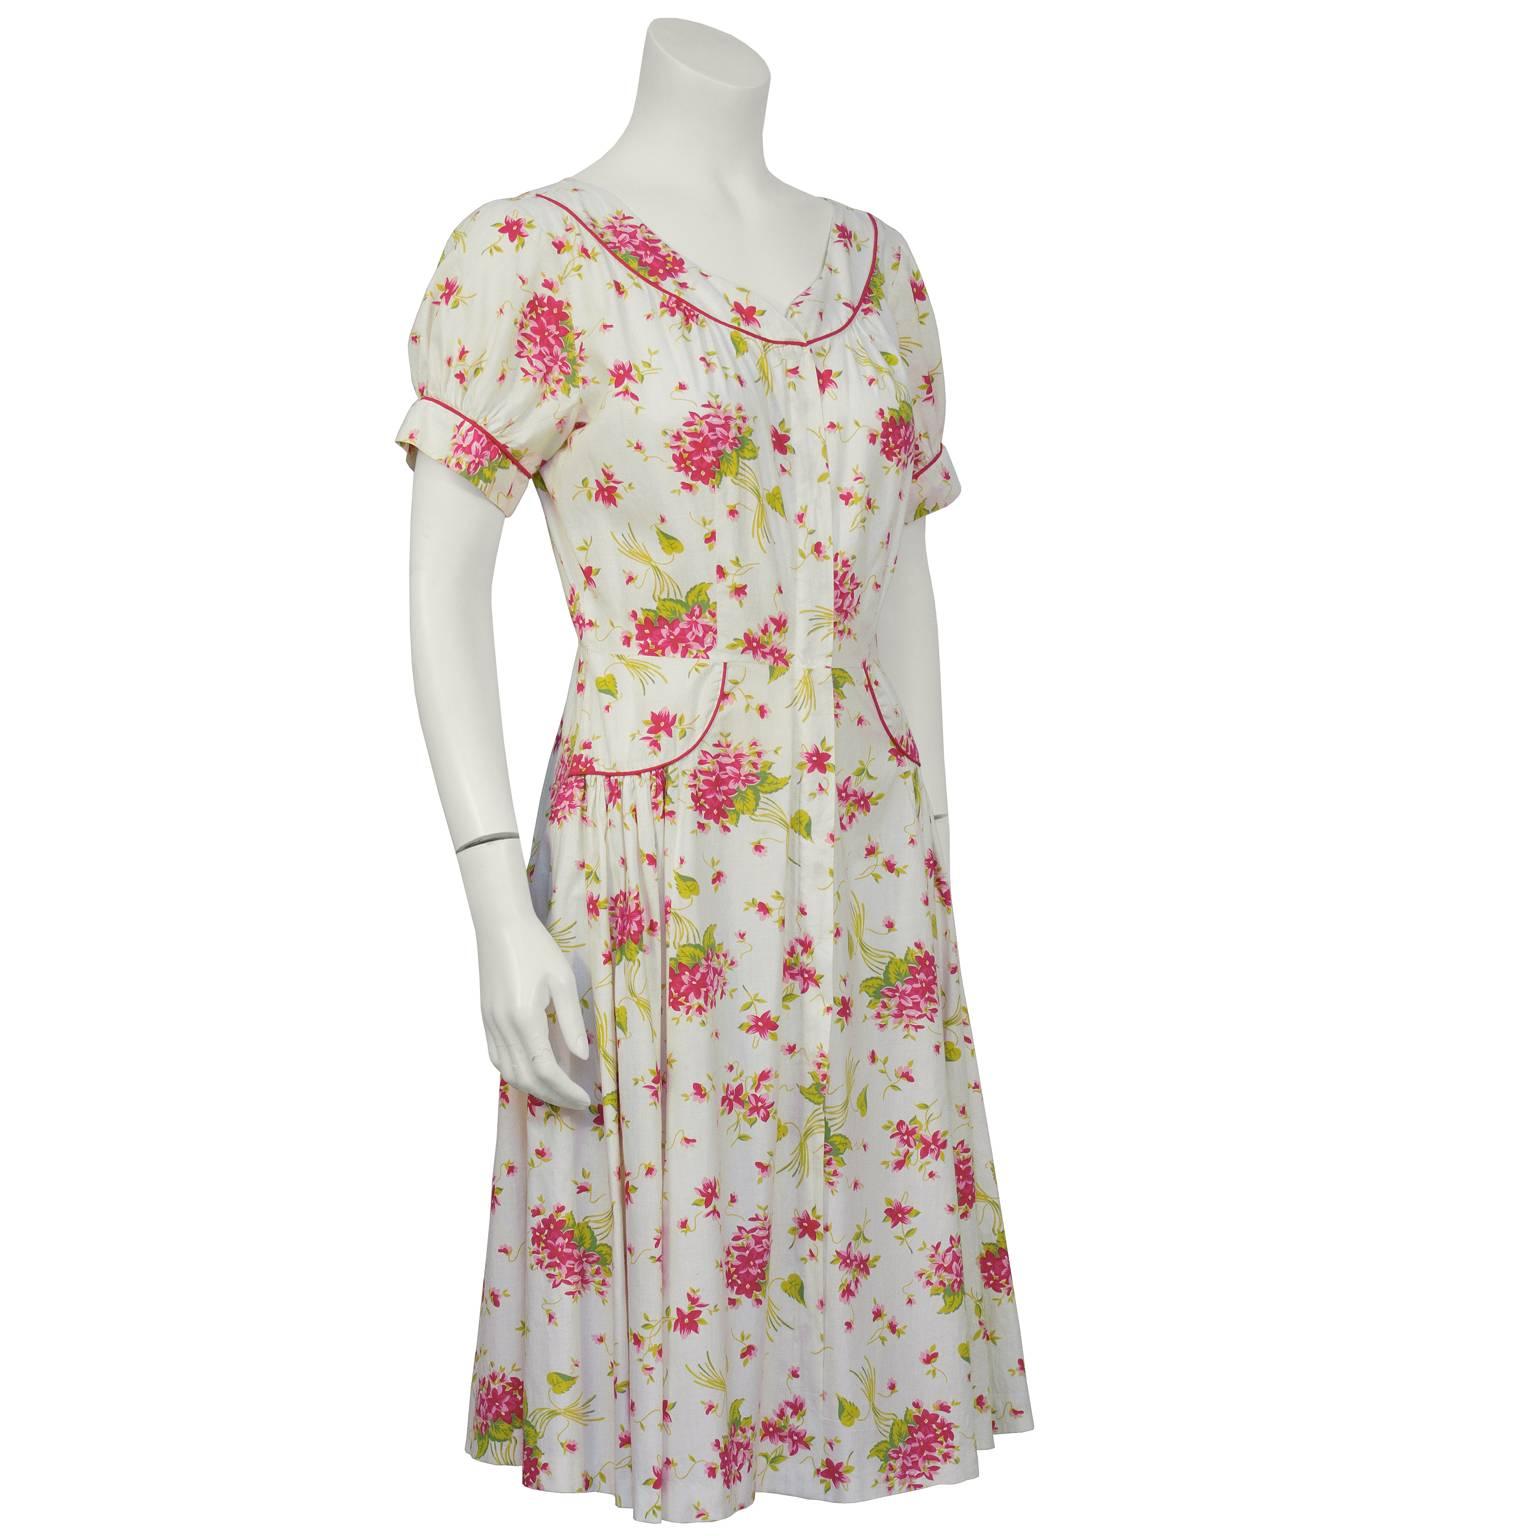 Green, pink and red floral printed cotton daydress from the 1950's. Red piping detail on the yoke style boatneck, cuffs and semicircle detail on hips. Zipper down the front is hidden behind a placket. Full skirt with pleating on hips, unlined. In